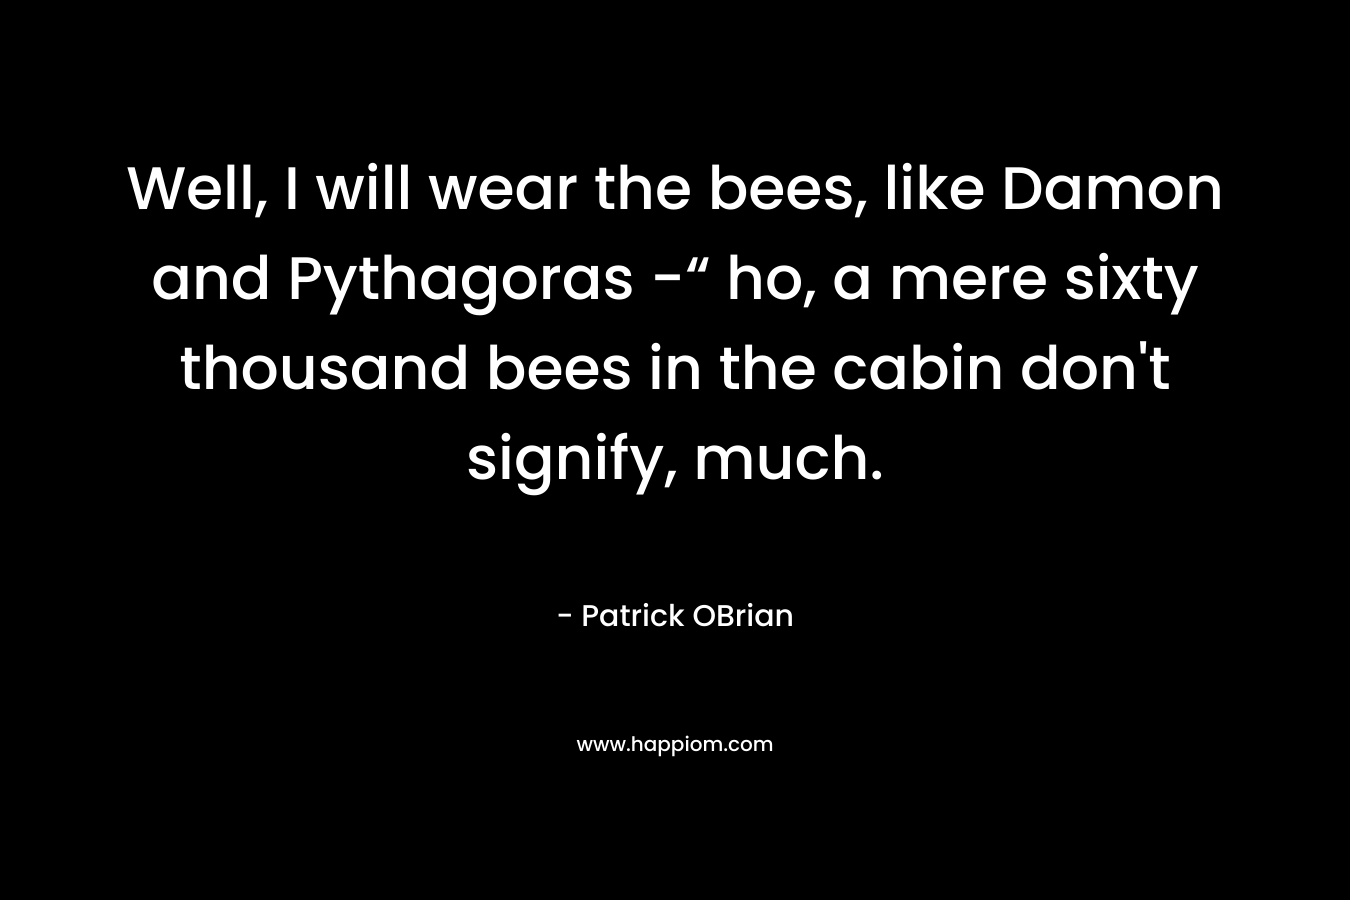 Well, I will wear the bees, like Damon and Pythagoras -“ ho, a mere sixty thousand bees in the cabin don't signify, much.